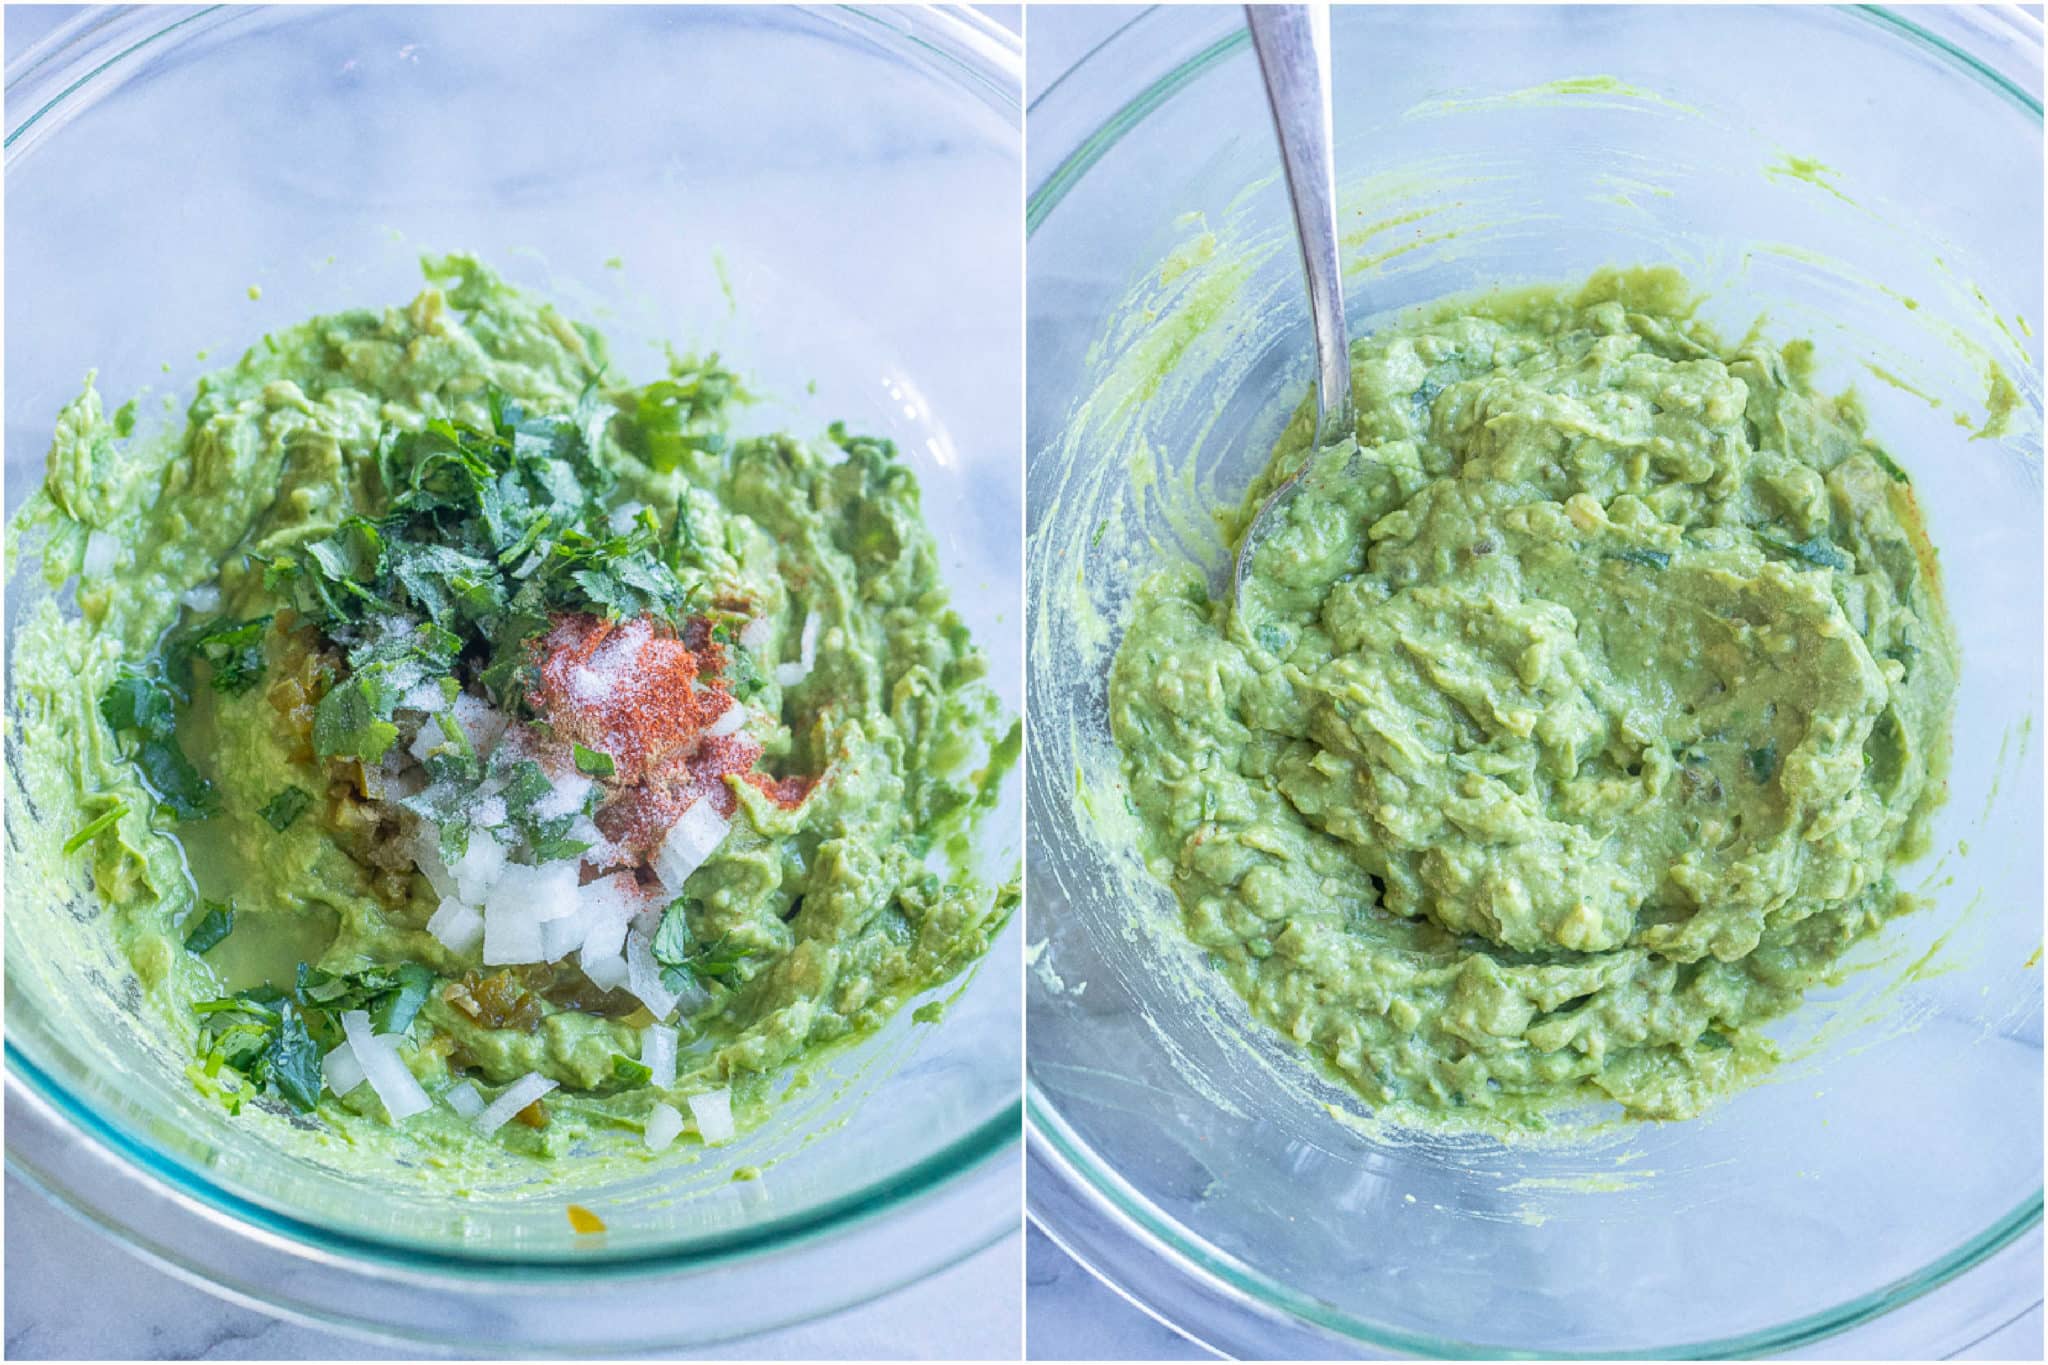 all the guacamole ingredients added to a bowl and mixed together